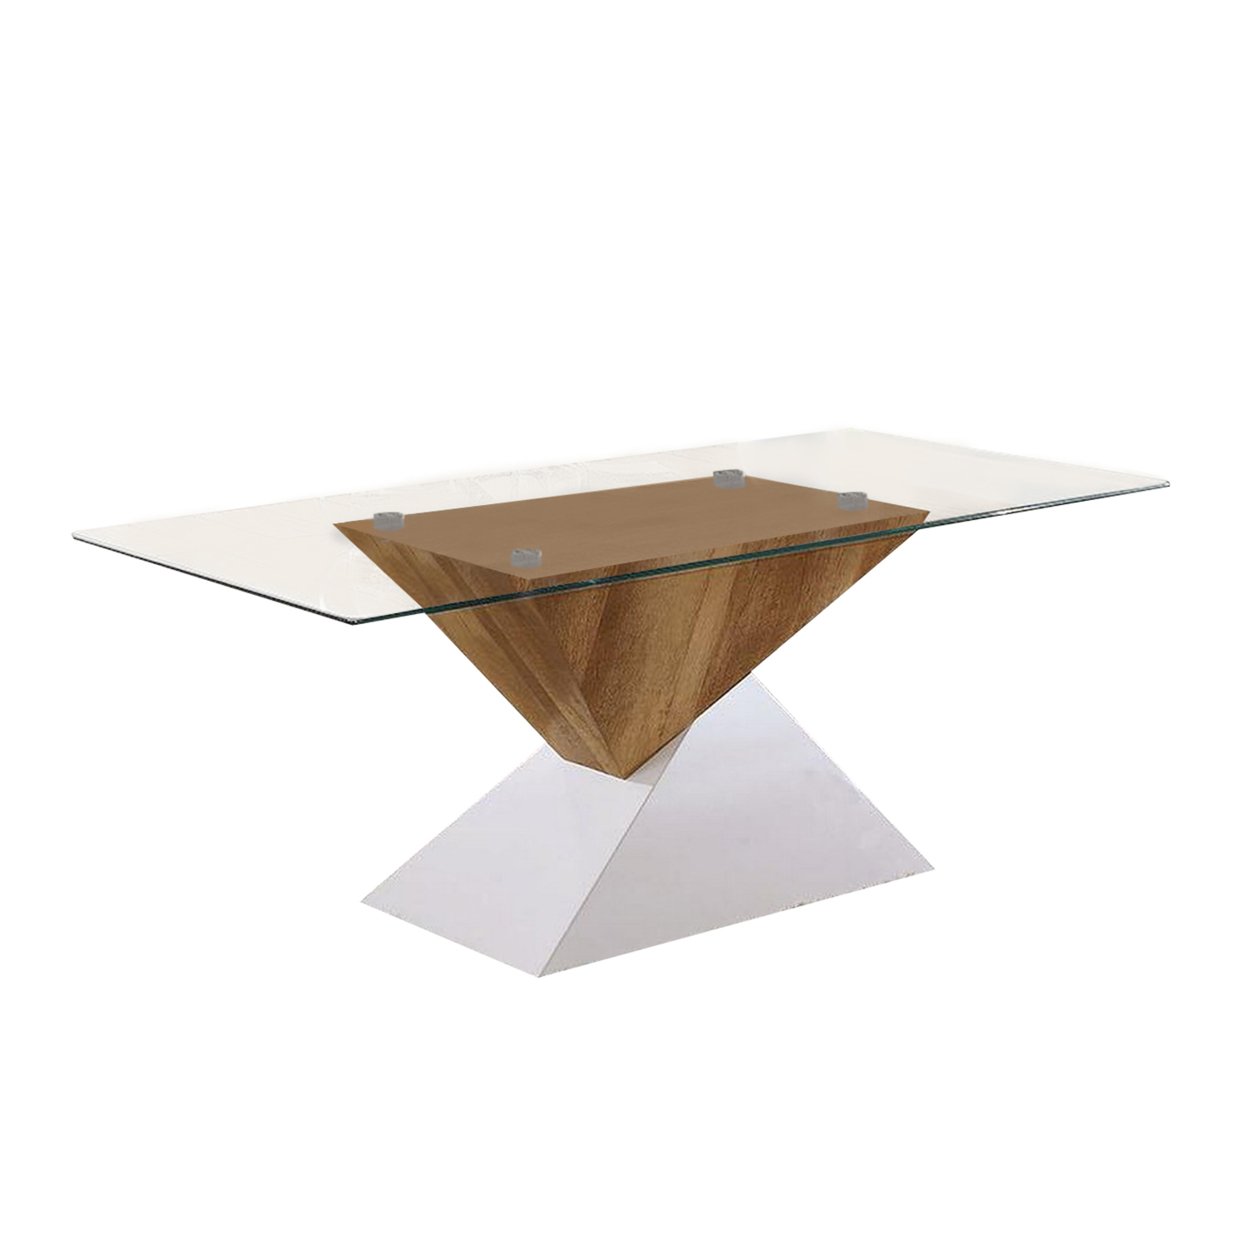 Two Tone Wooden End Table With Pedestal Base, White And Brown- Saltoro Sherpi